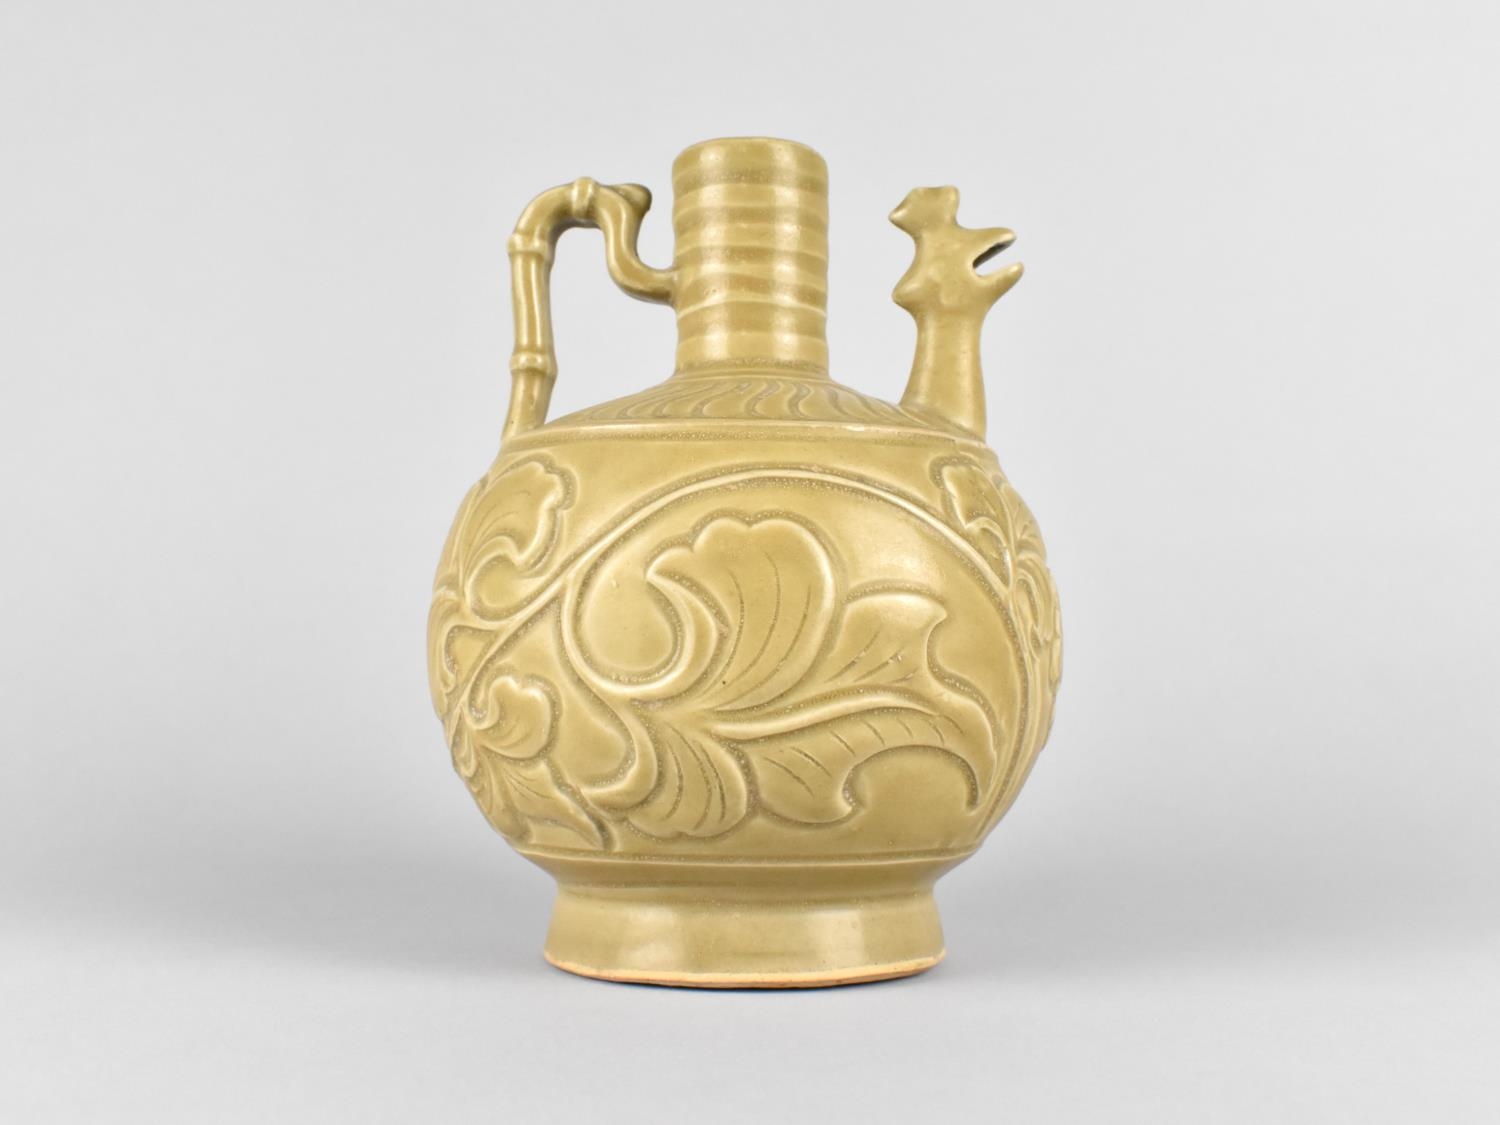 A Chinese Celadon Ewer the Body Decorated with Incised Foliage Design and Having Zoomorphic Spout, - Image 2 of 3